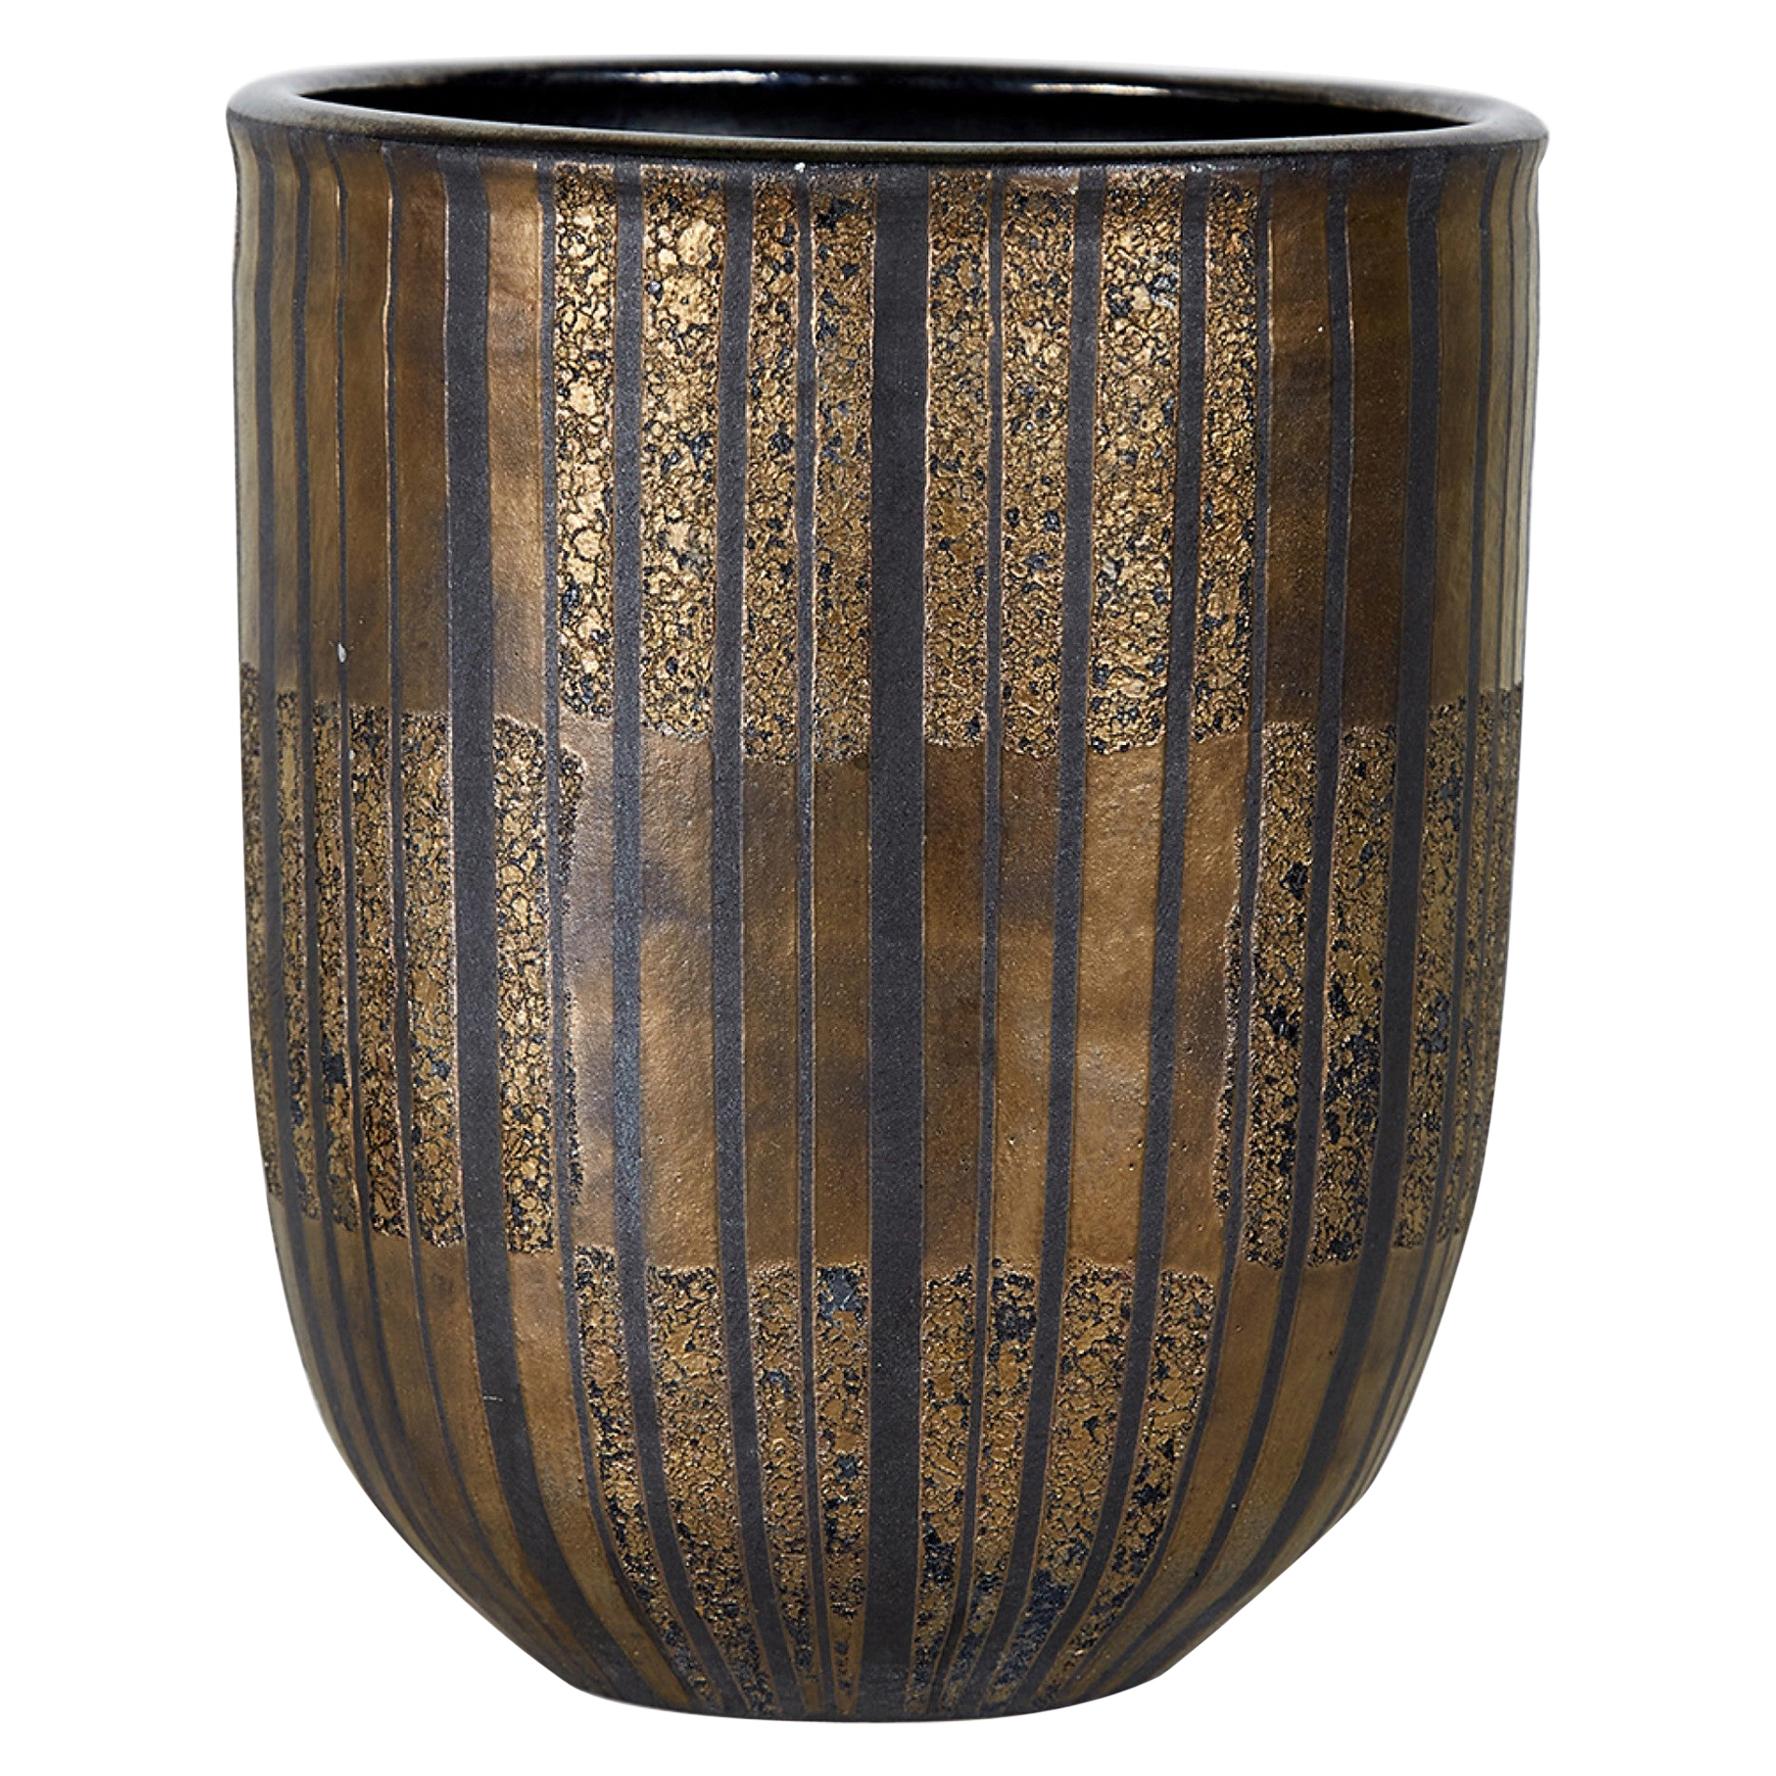 Gary Di Pasquale Contemporary Thrown Bronze and Black Glazed Cylindrical Vase